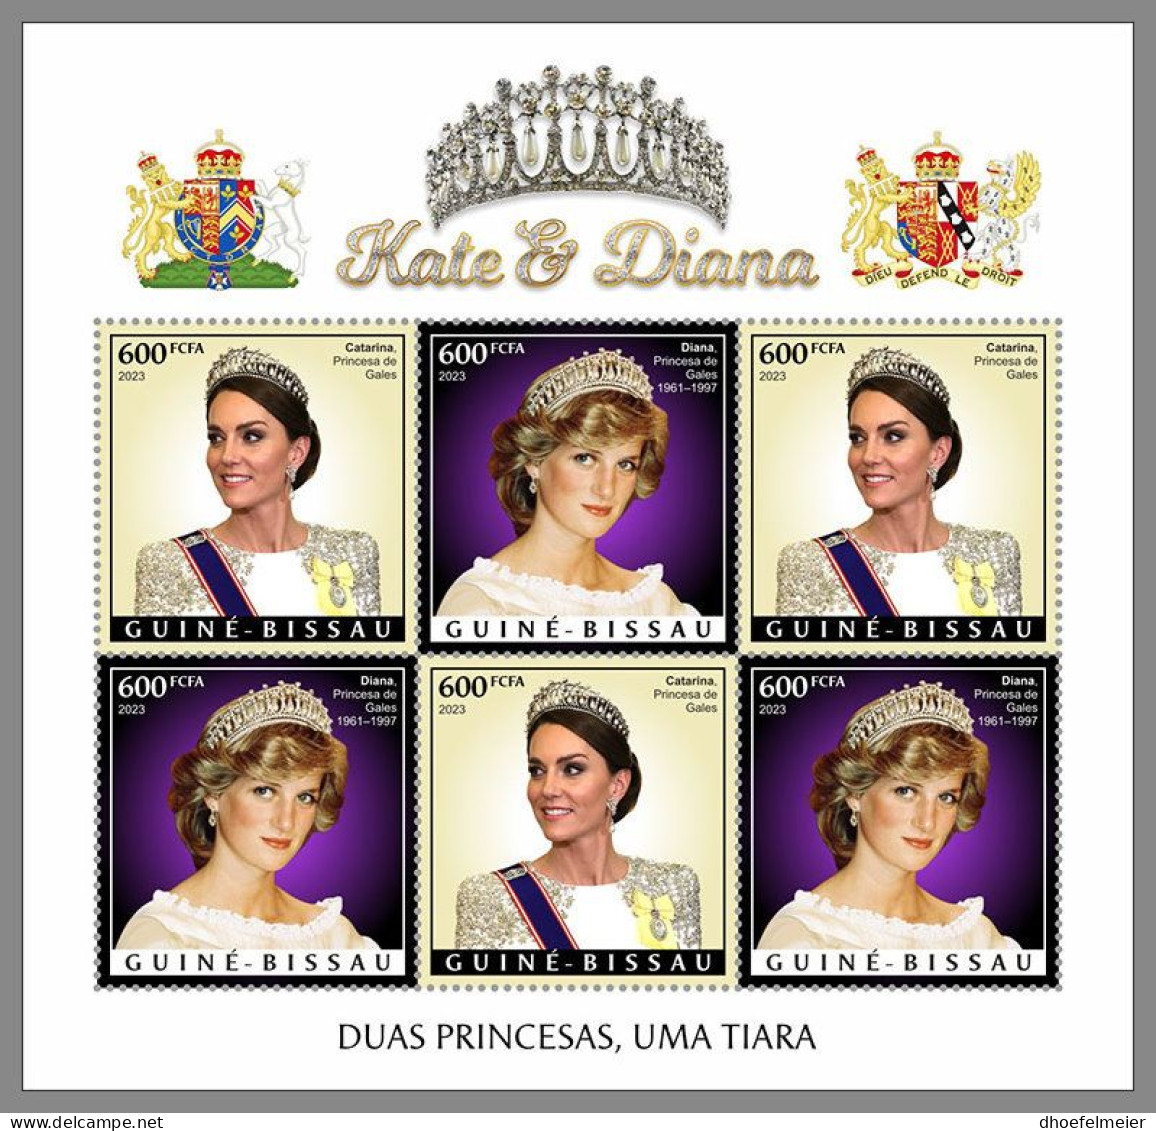 GUINEA-BISSAU 2023 MNH Kate & Diana M/S – OFFICIAL ISSUE – DHQ2420 - Familles Royales